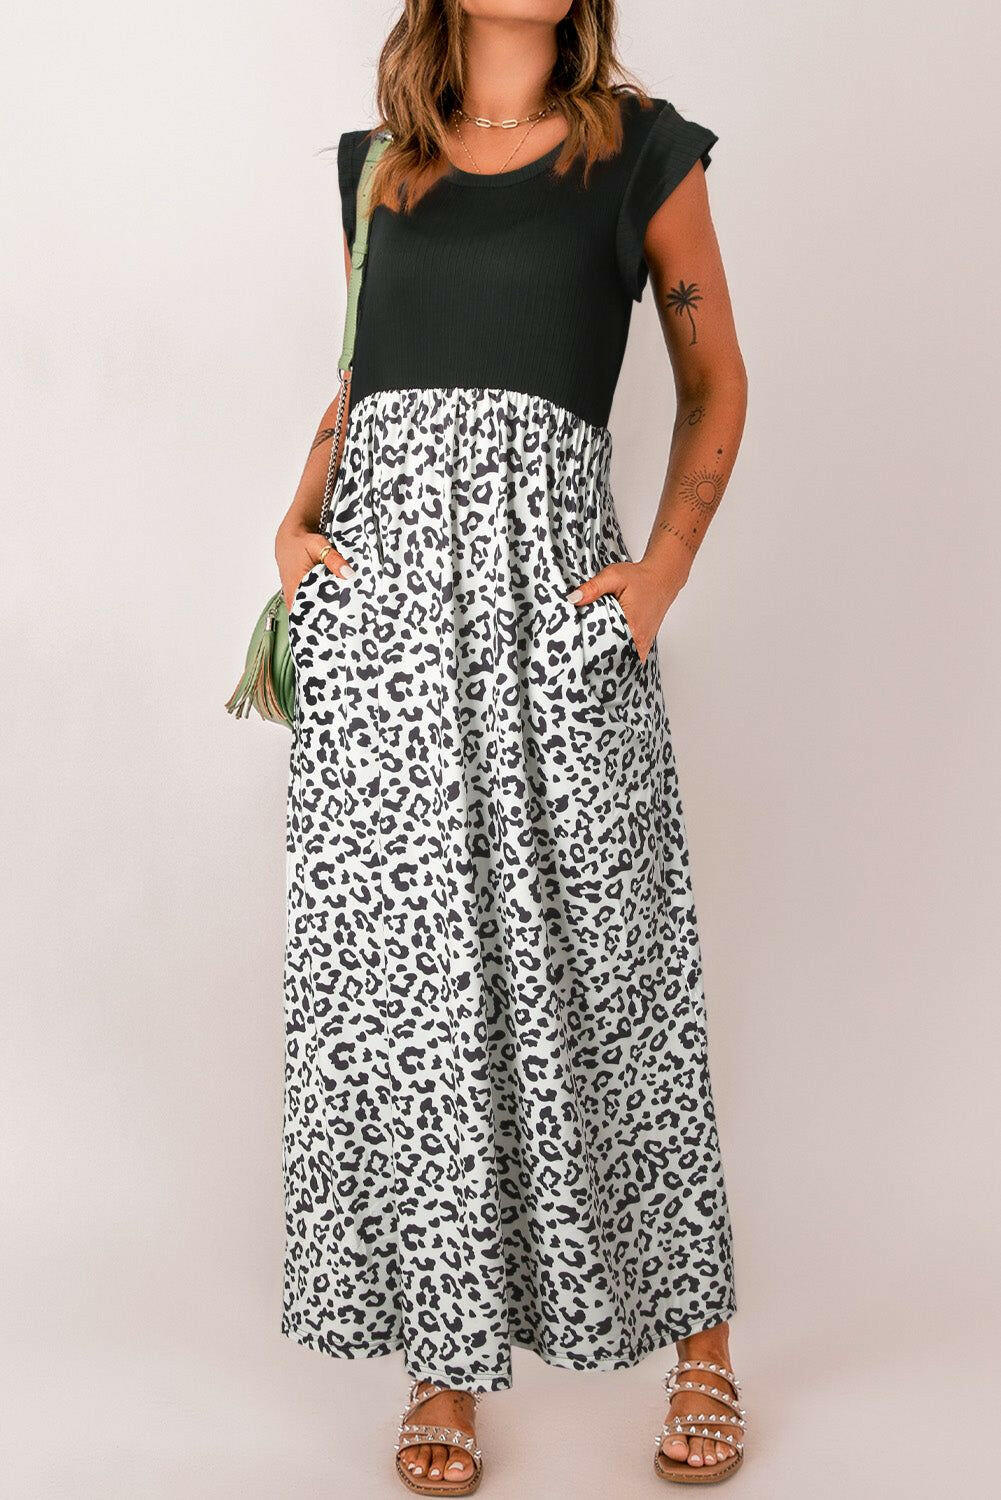 Leopard Print Round Neck Maxi Dress with Pockets - By Baano